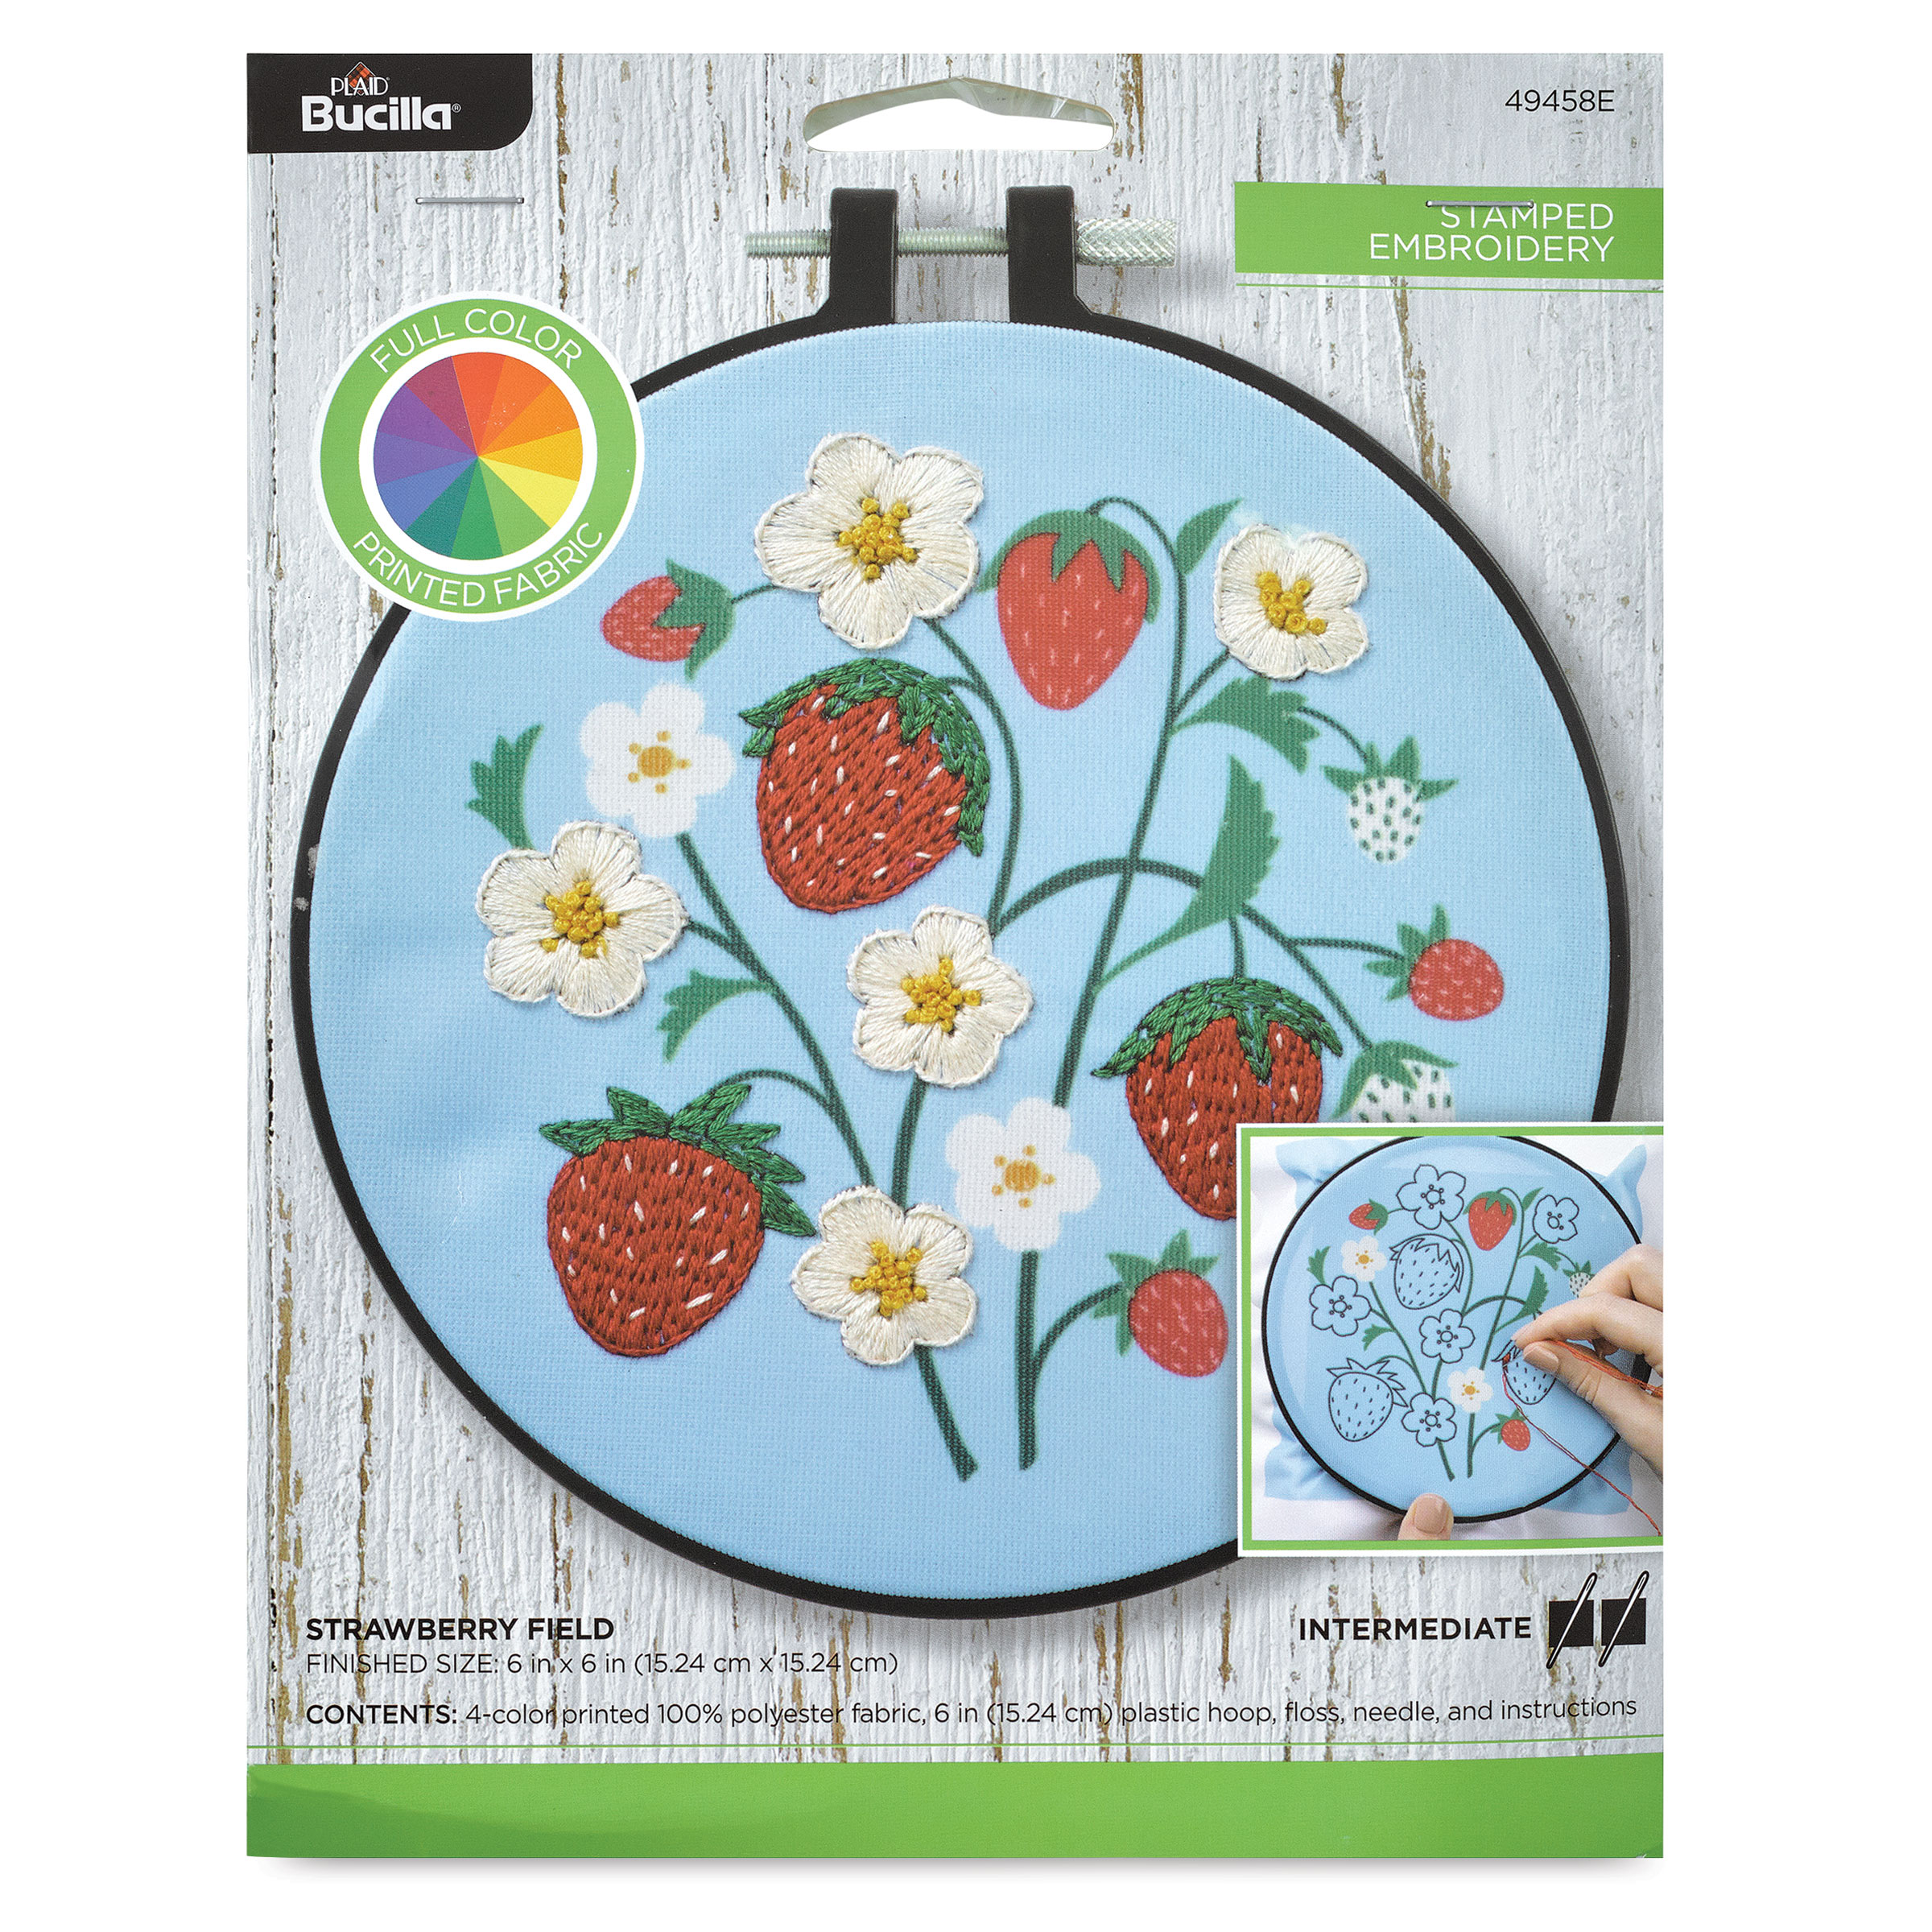 Bucilla Stamped Embroidery Kit 6 Round-Strawberry Field